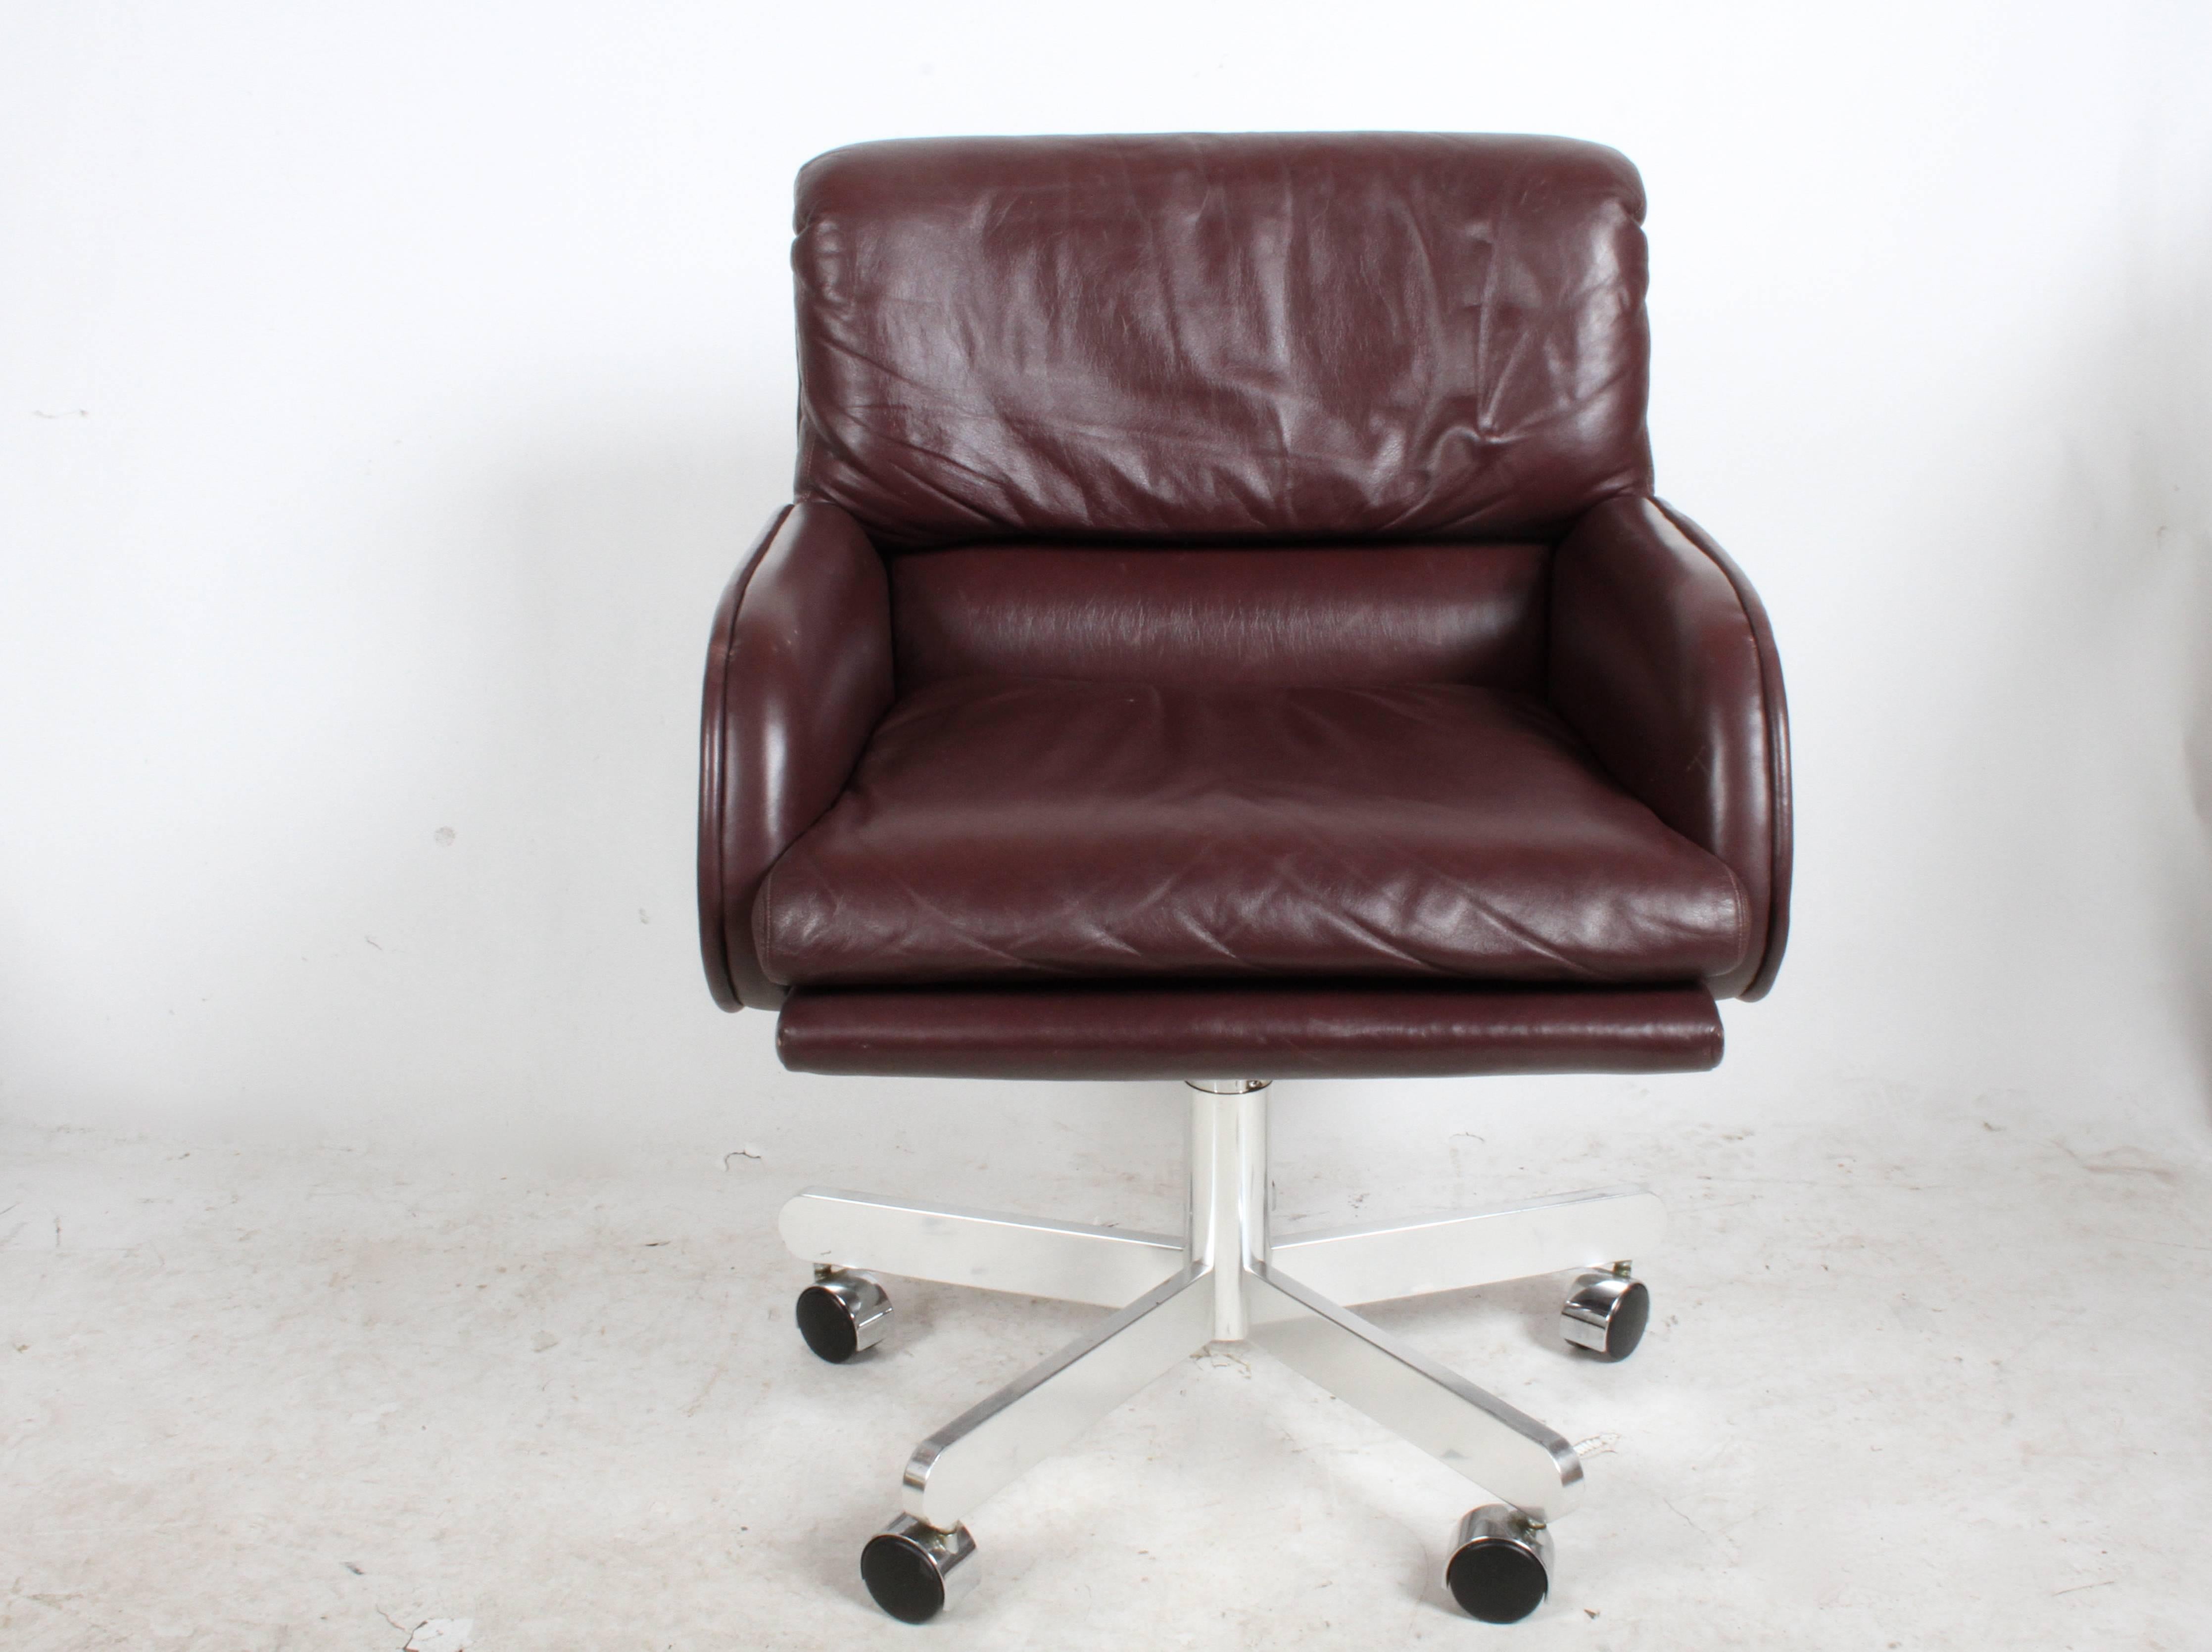 Set of six plush office, desk or conference armchairs designed by Roger Sprunger for Dunbar, D labels, chairs in dark eggplant leather with 5 star solid aluminum bases, adjustable seat height and tilt function. 

Note leather has some scruffs and